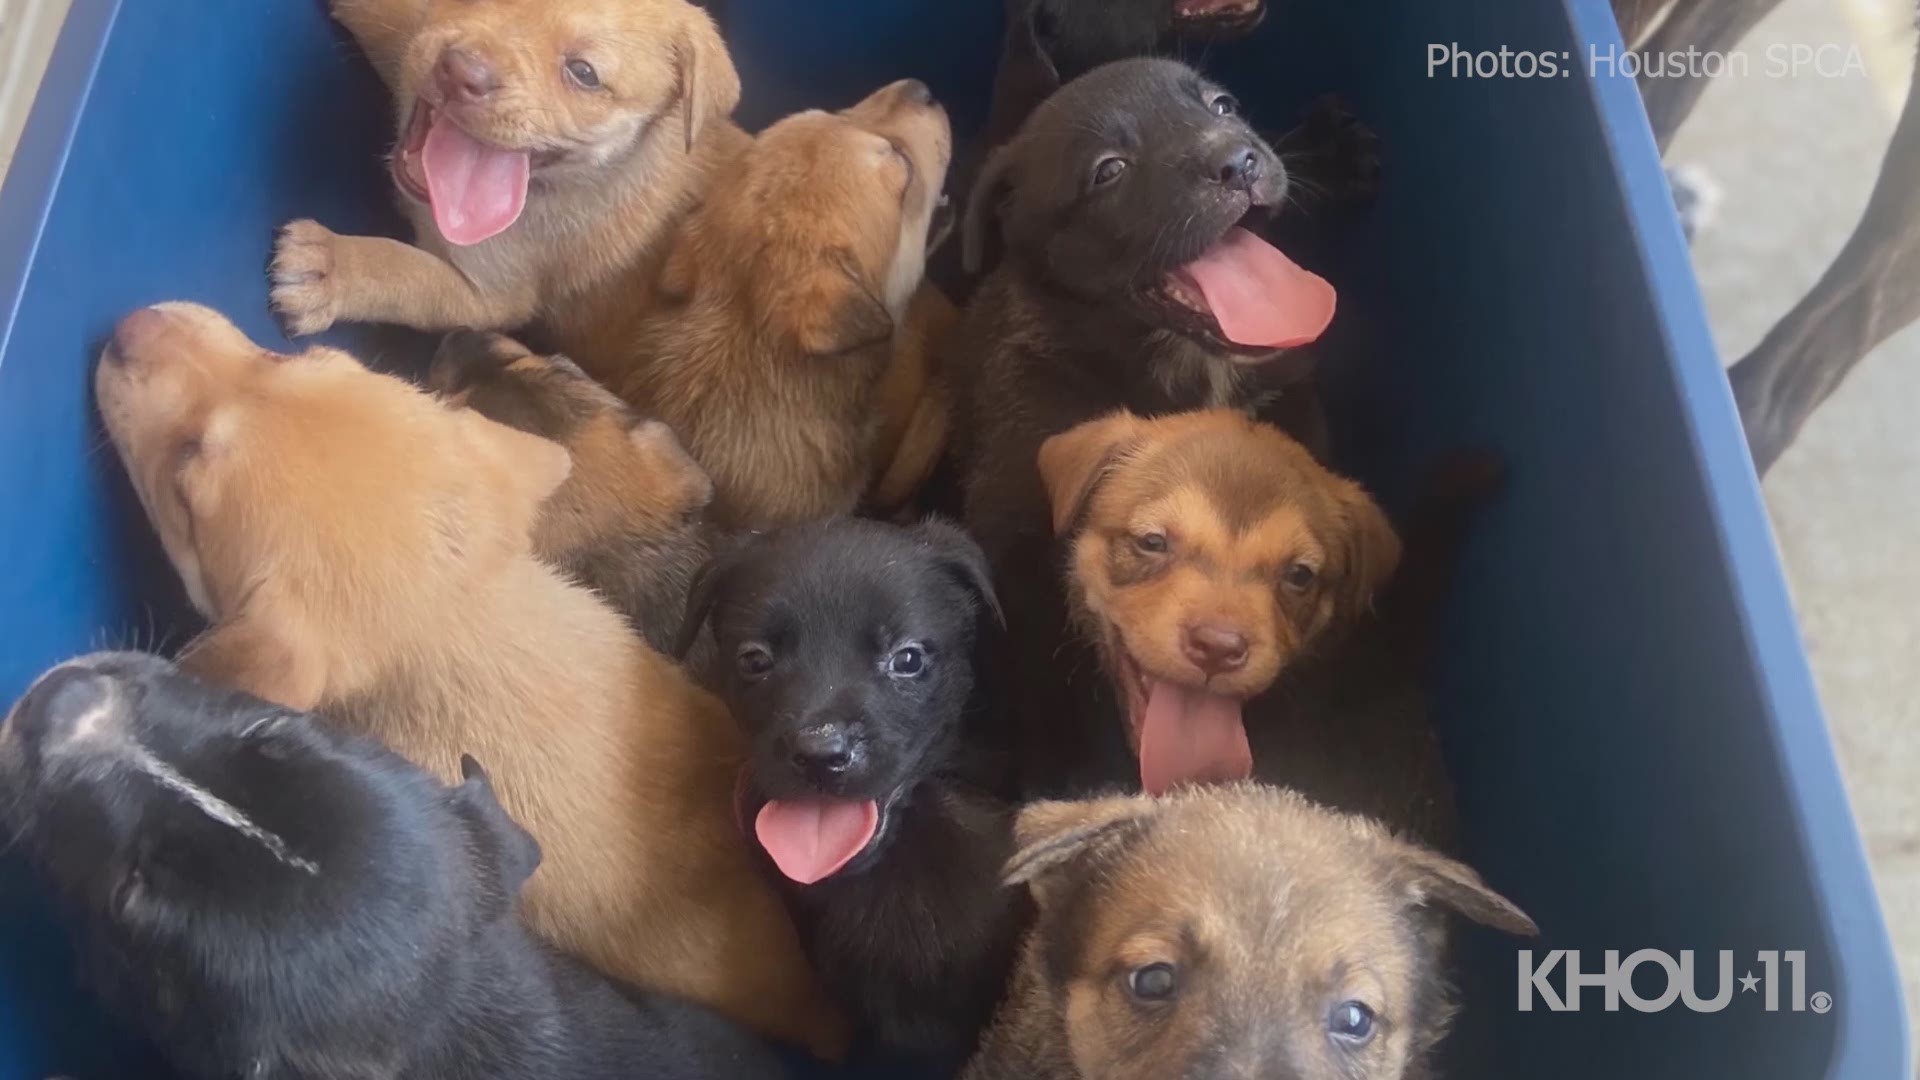 The Houston SPCA is now caring for 11 puppies and a momma dog who were found left in a box and tied up in the Texas heat and humidity on Wednesday, the organization